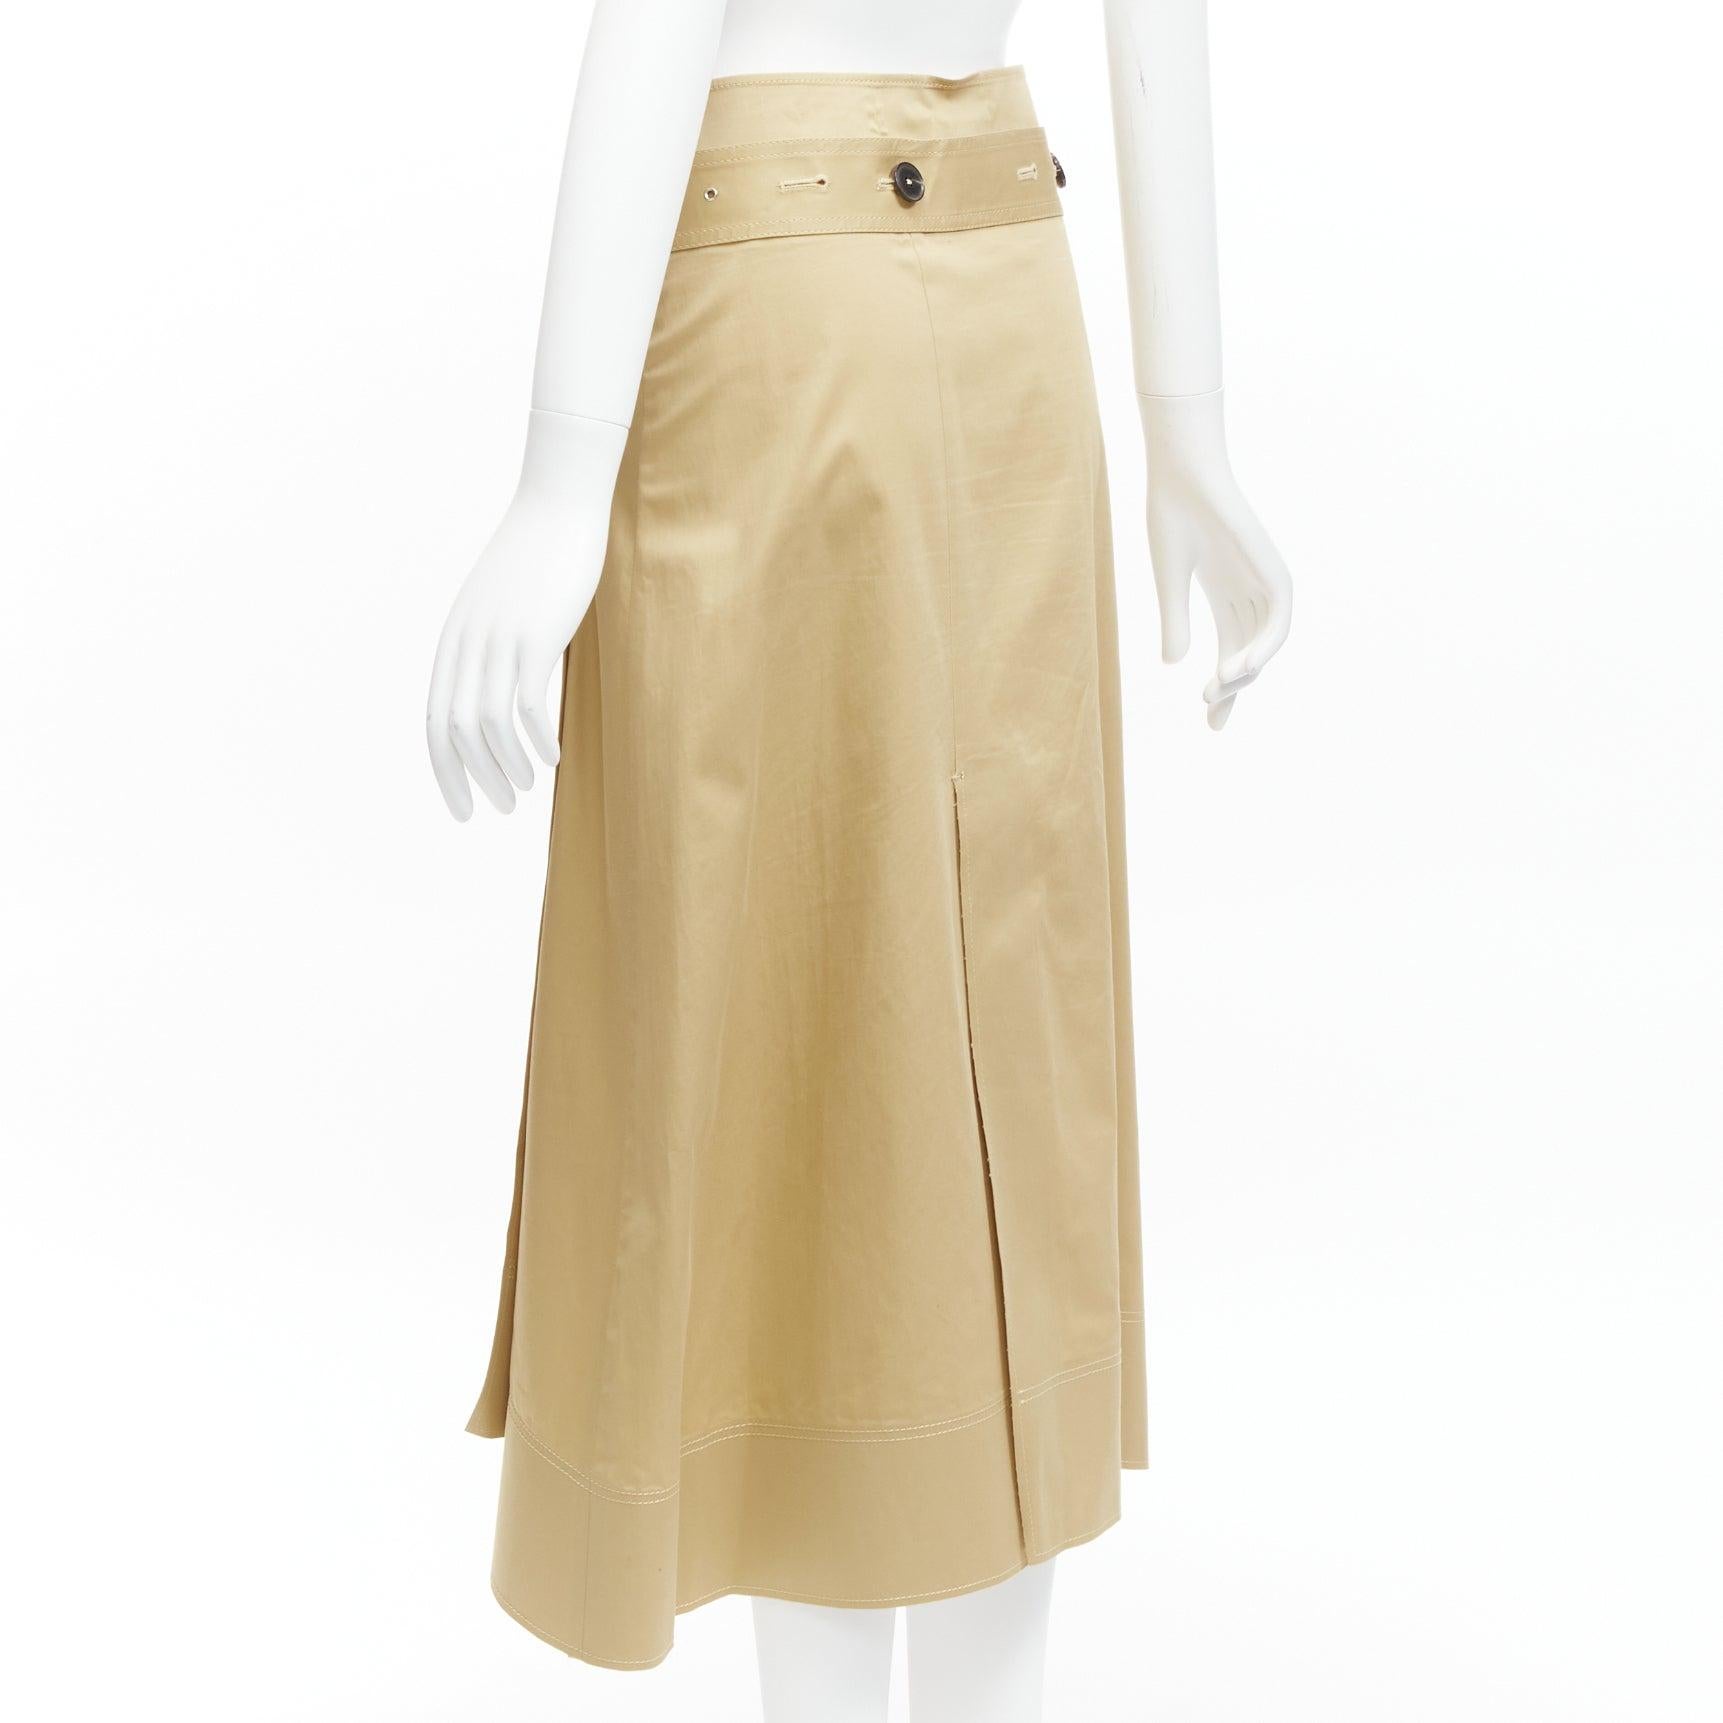 JOSEPH khaki cotton military safari belted trench inspired A-line wrap skirt For Sale 1